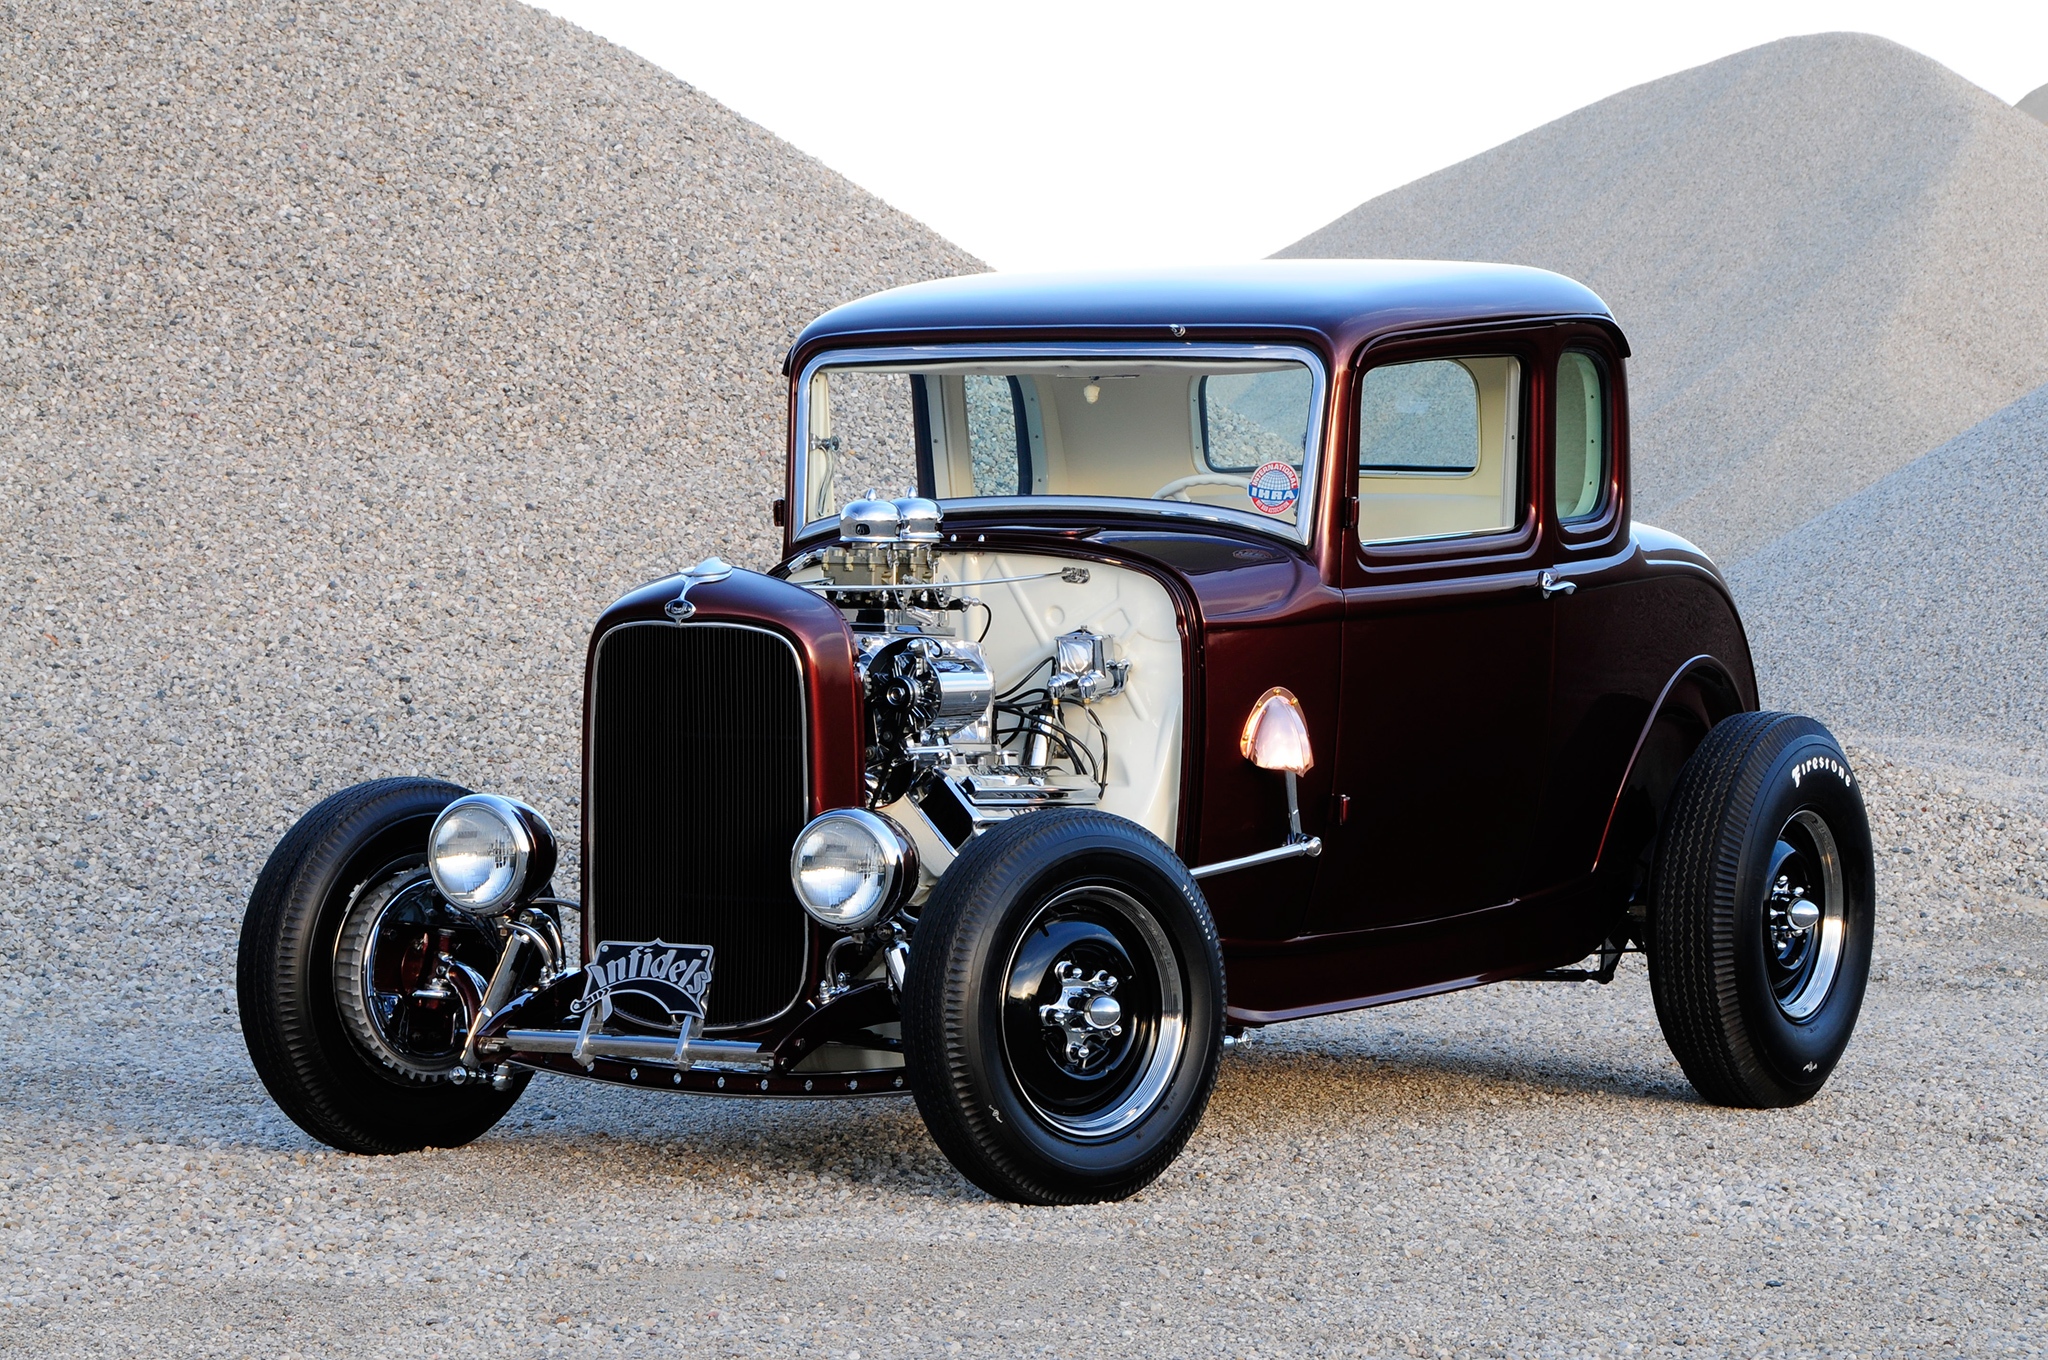 1932 Ford Deuce Coupe Backgrounds on Wallpapers Vista